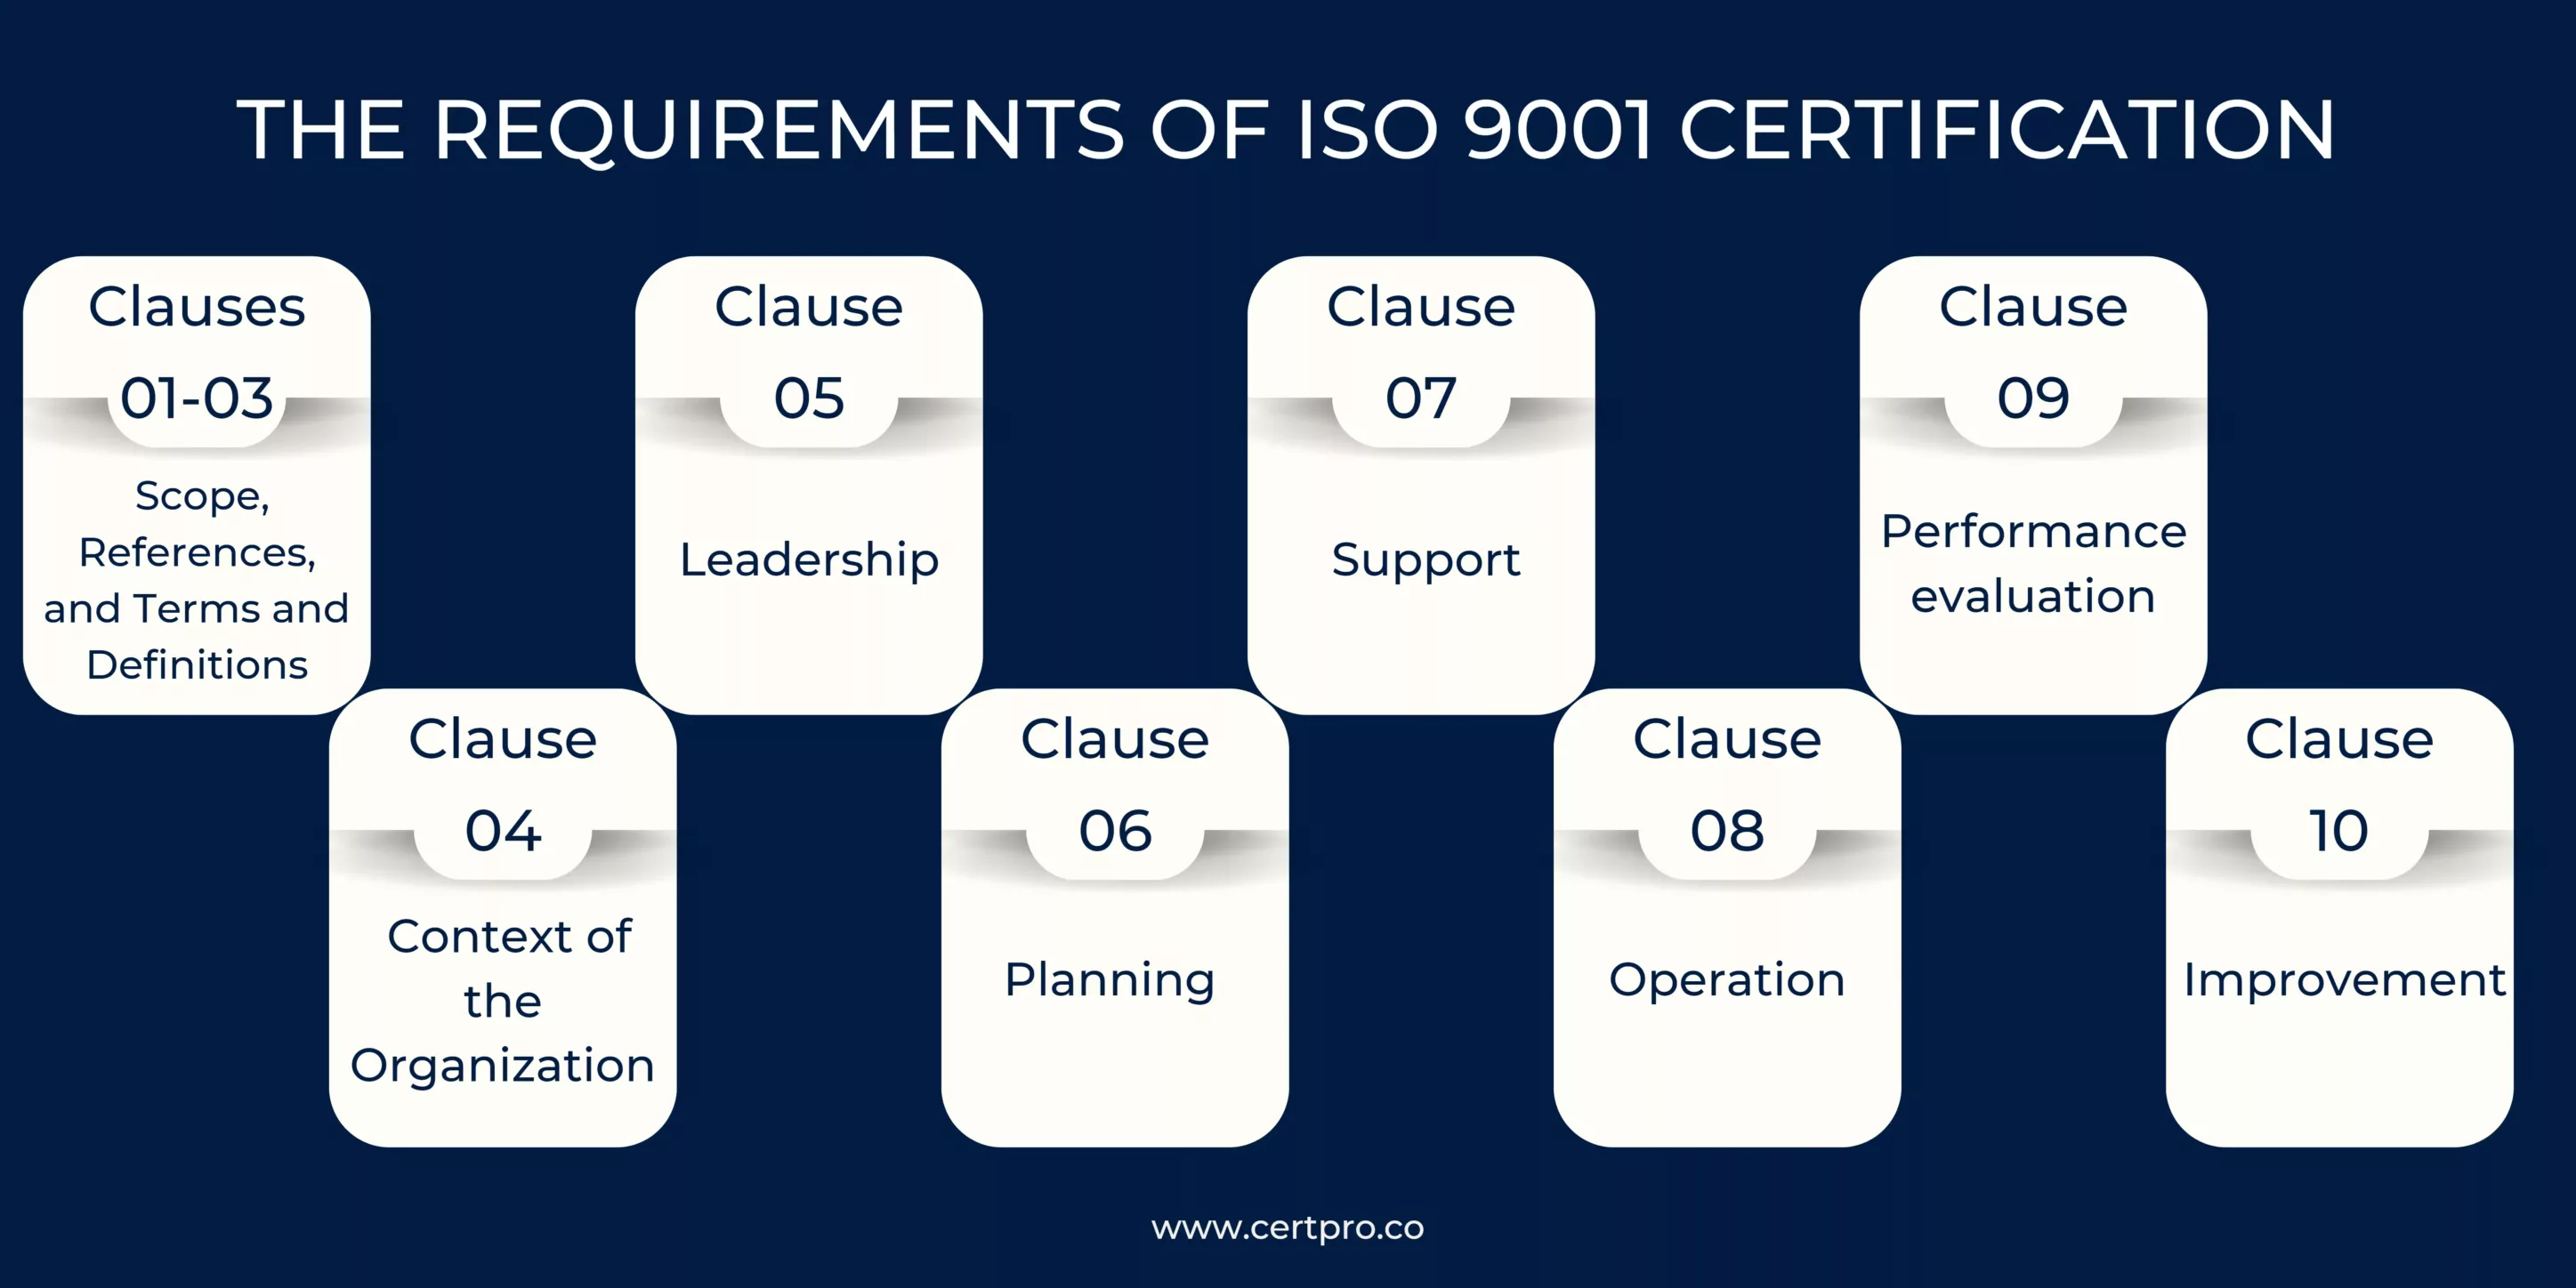 REQUIREMENTS OF ISO 9001 CERTIFICATION